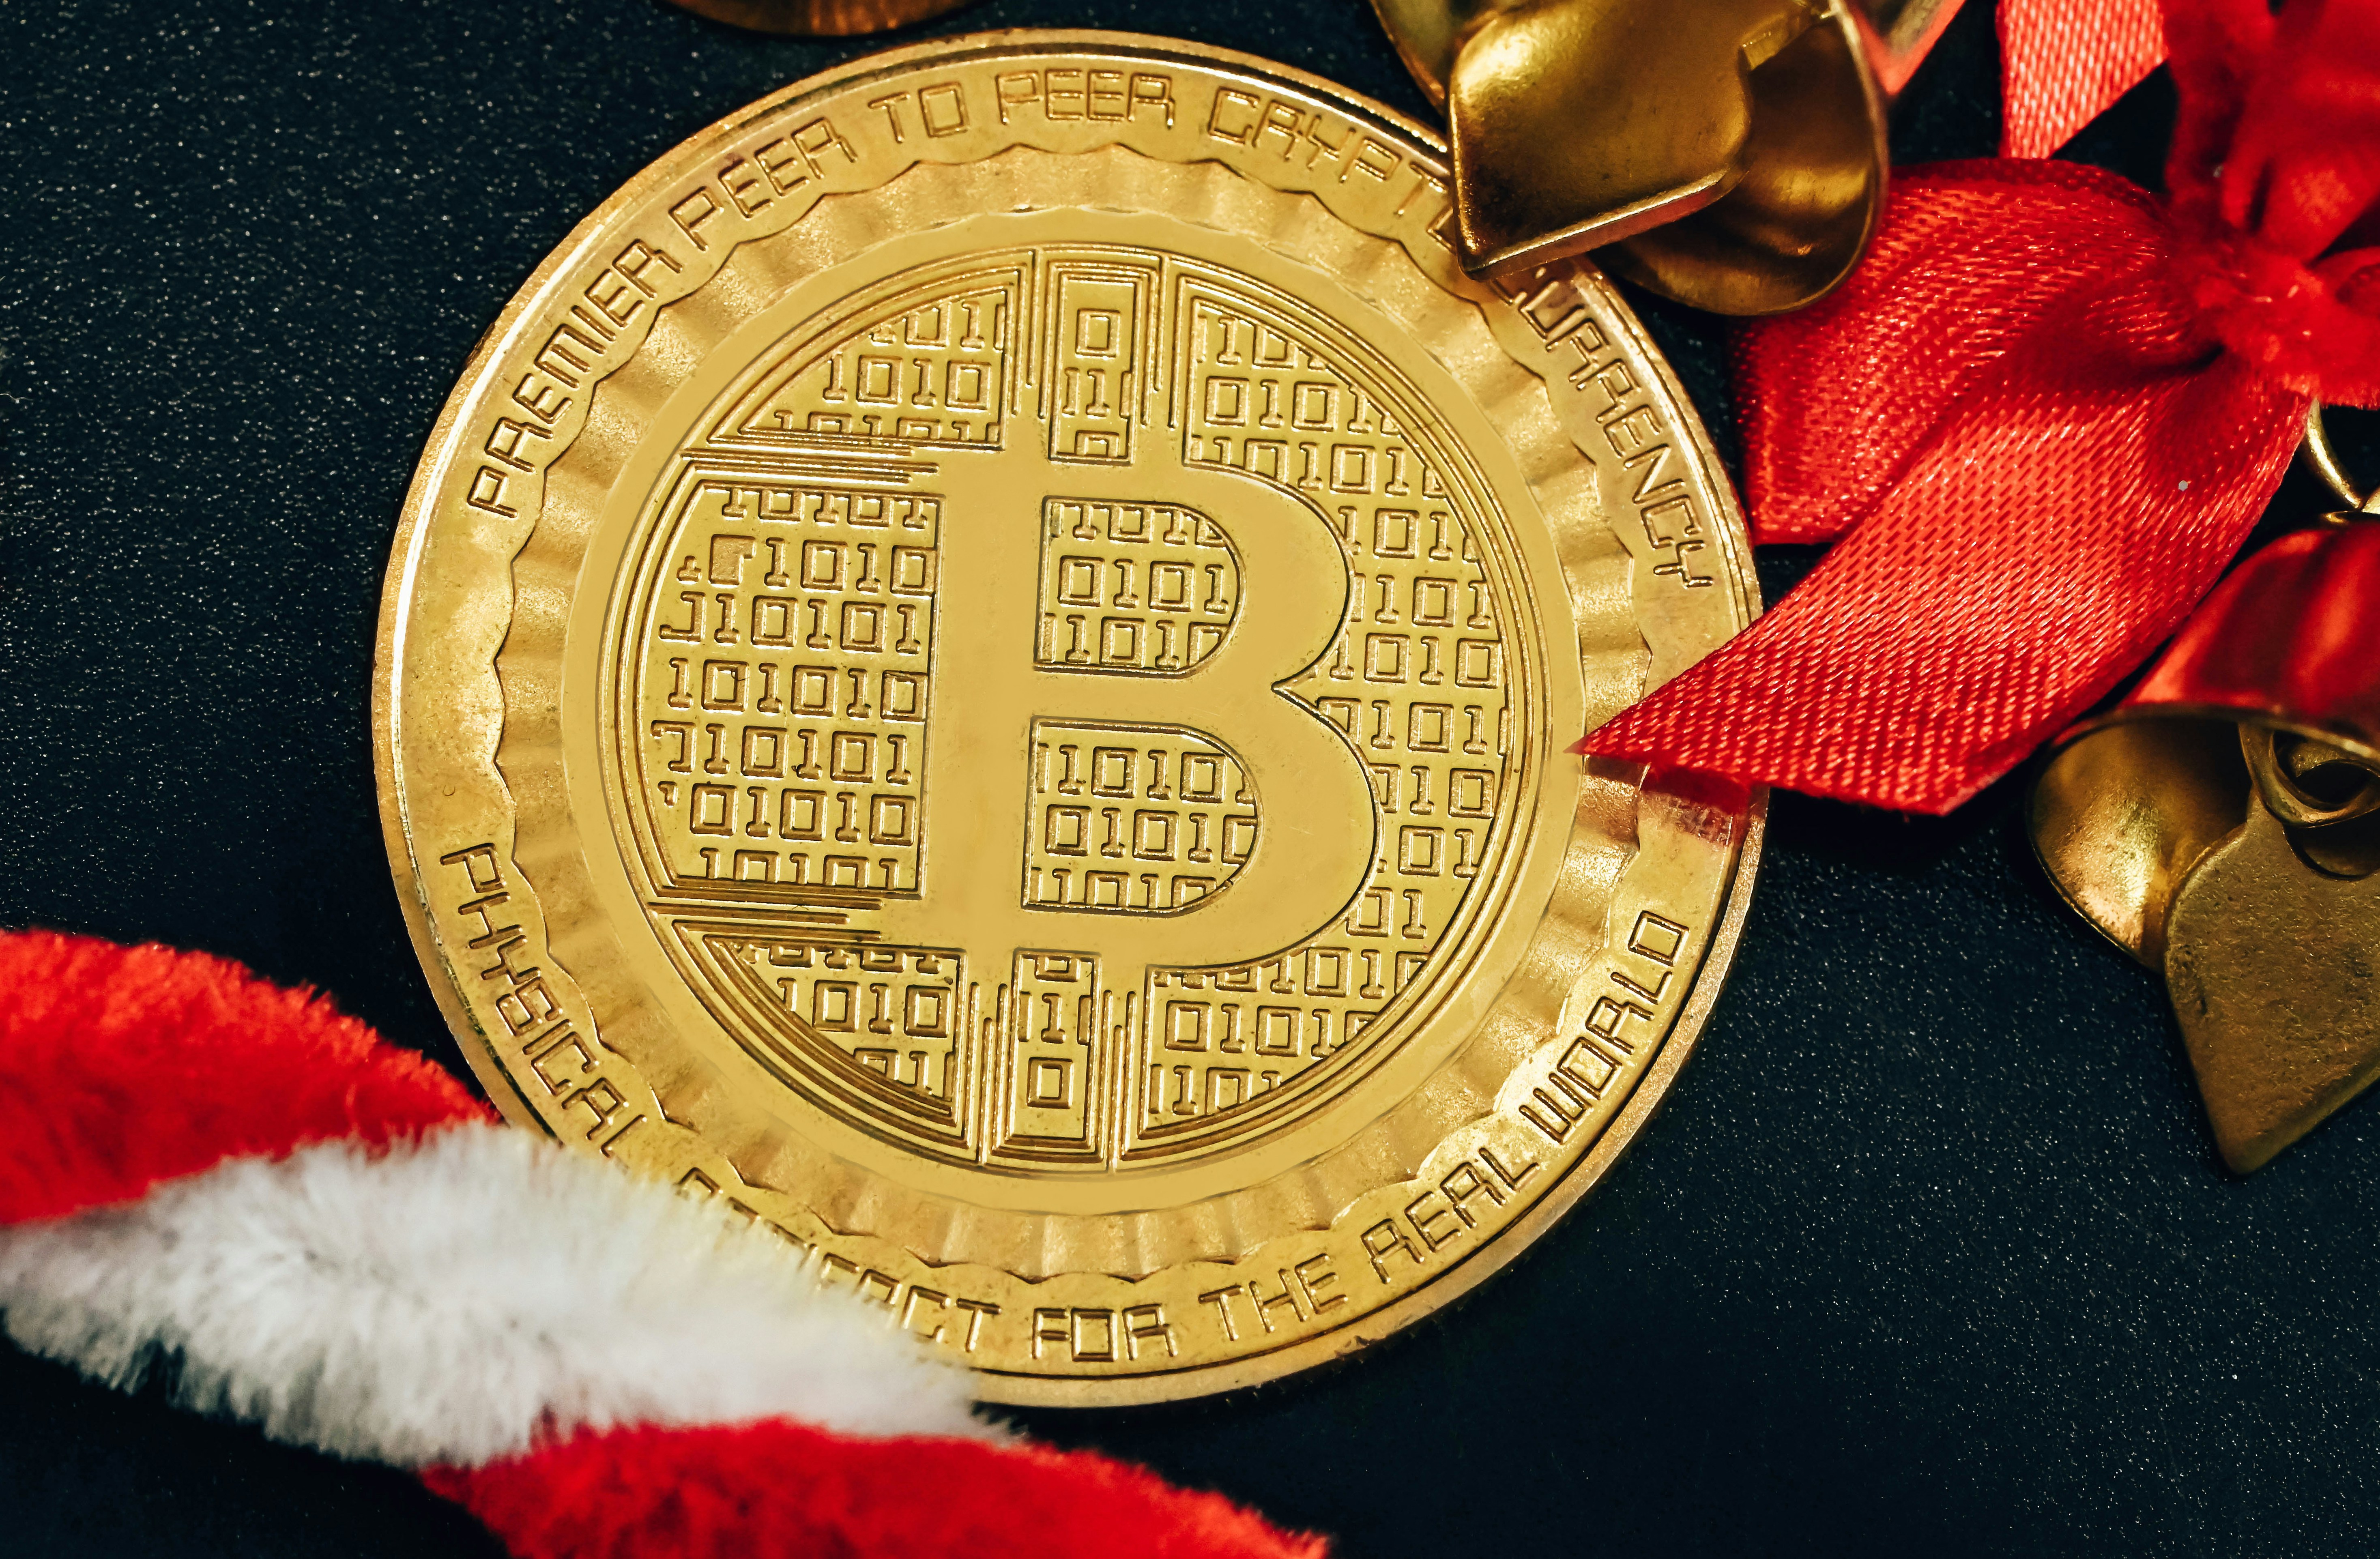 A single Bitcoin in the middle of candy cane and jingle bell